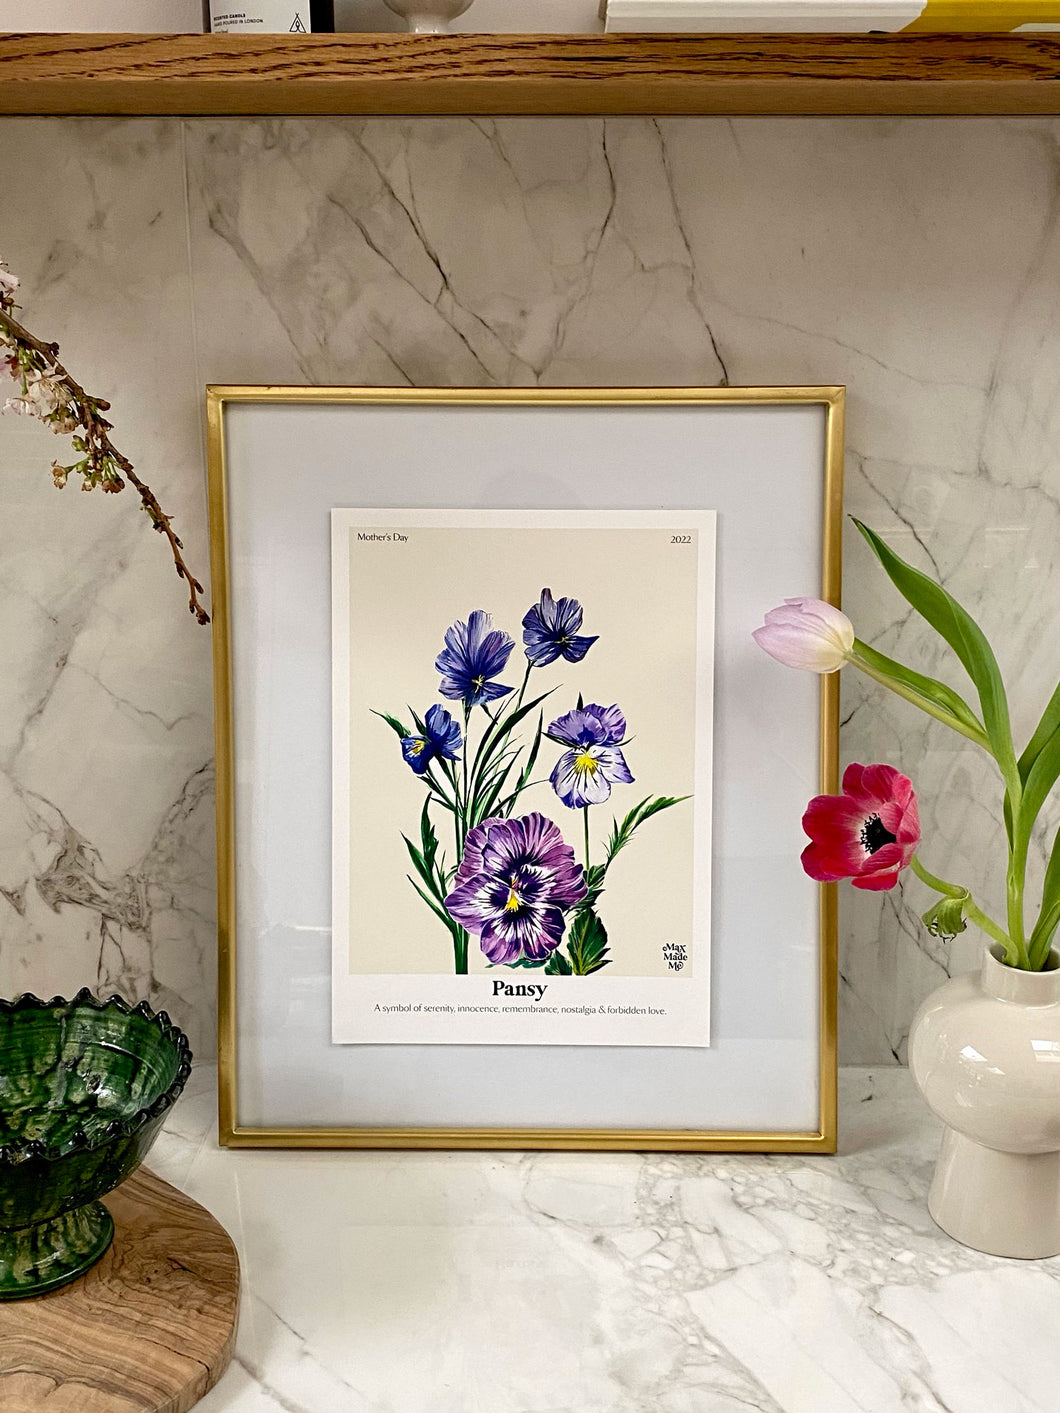 The Language of Flowers Pansy Giclée Print